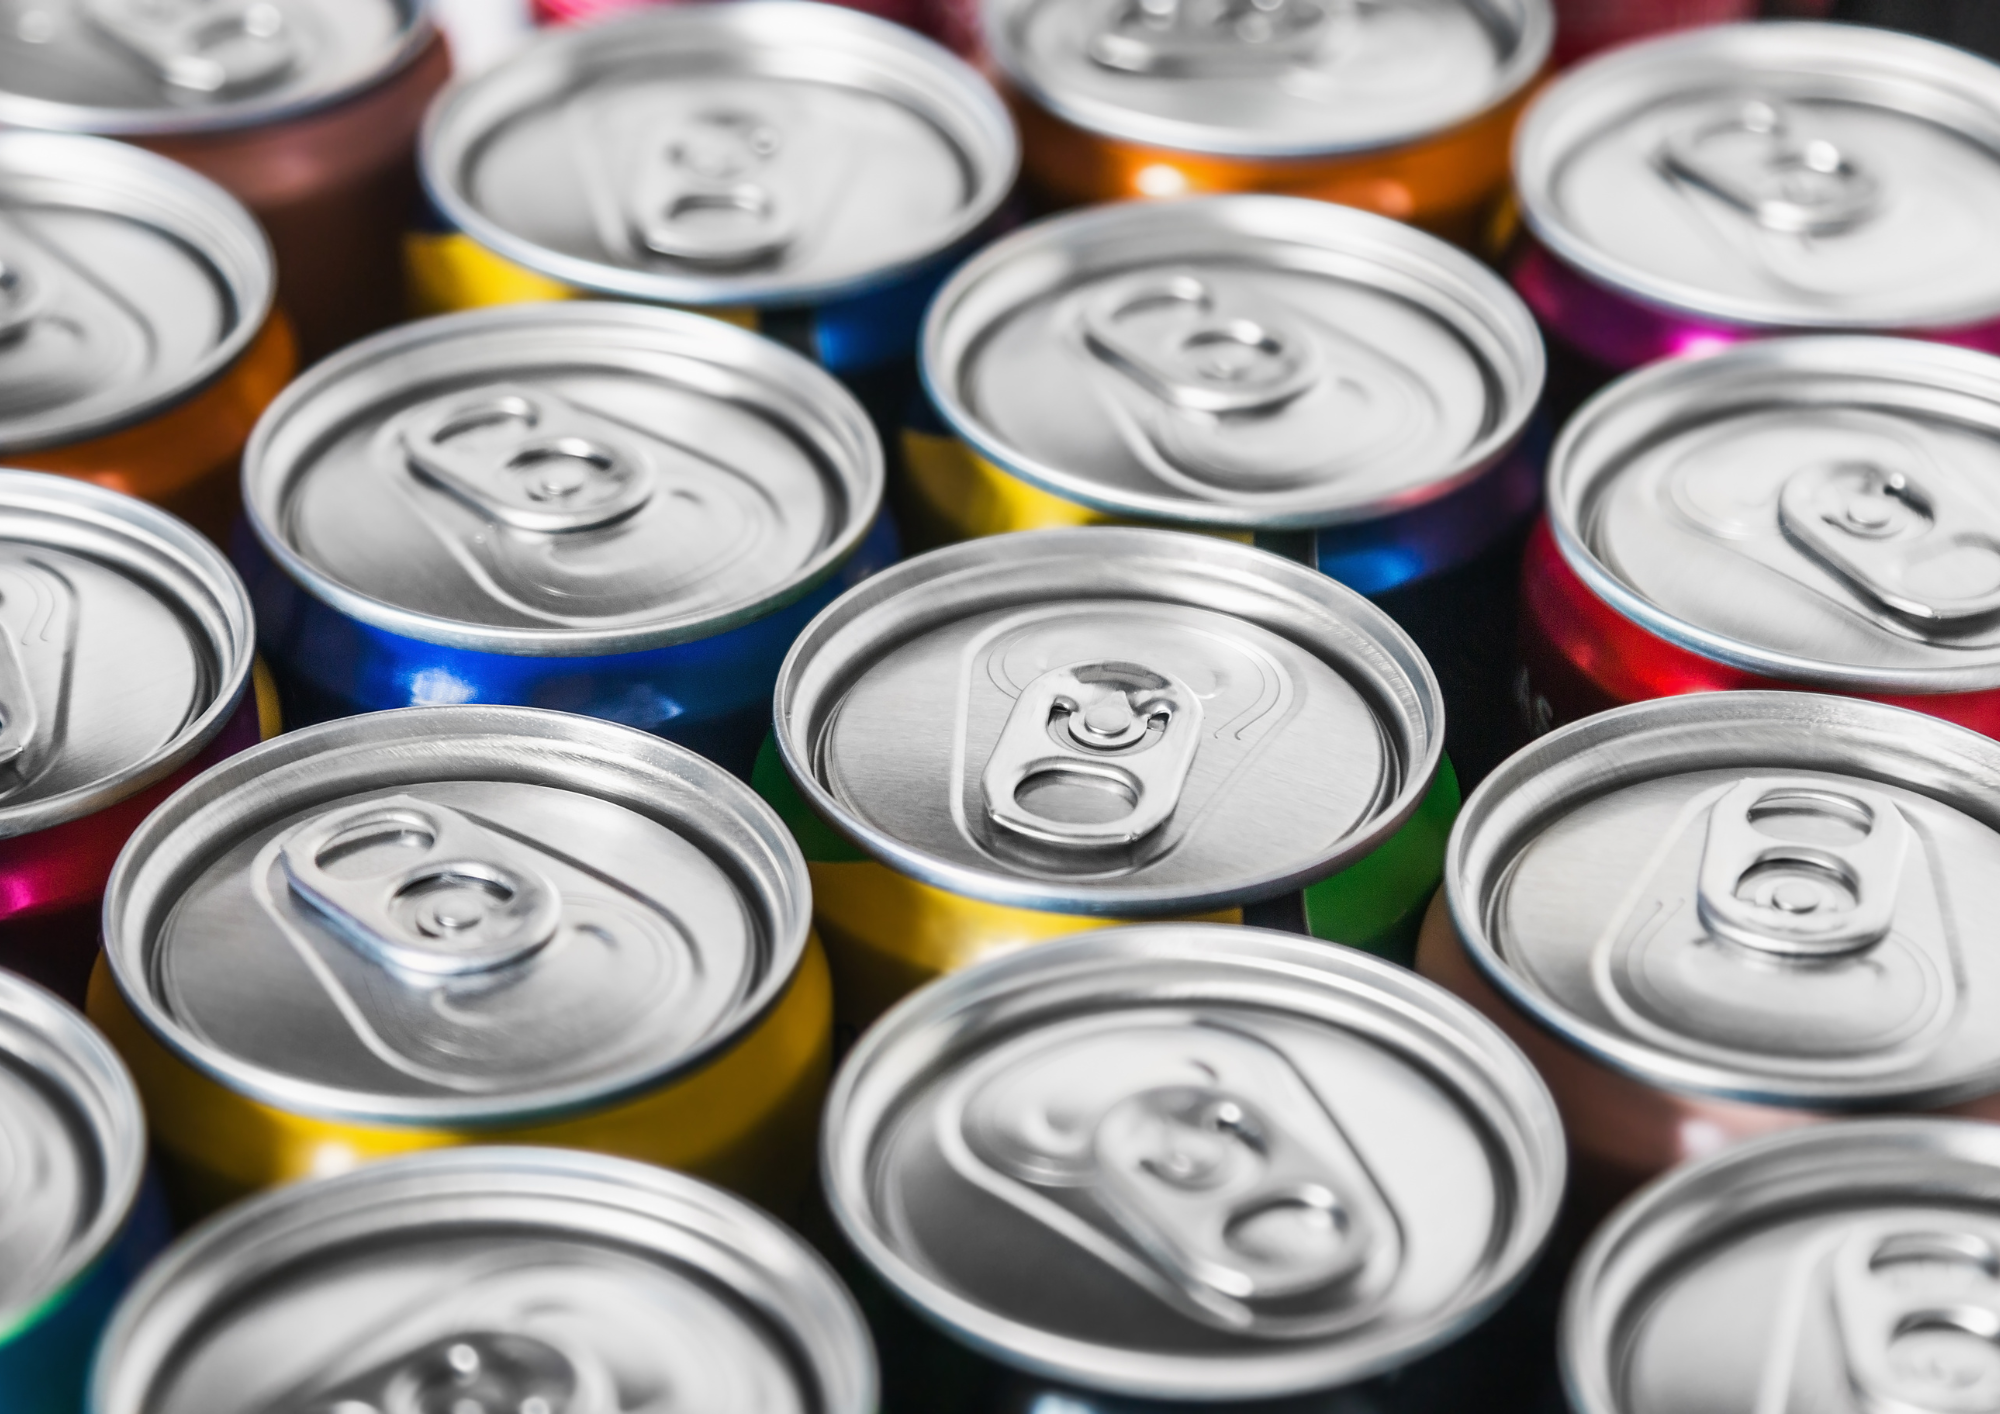 Is there such a thing as environmentally safe packaging? GREENWASHING Aluminum